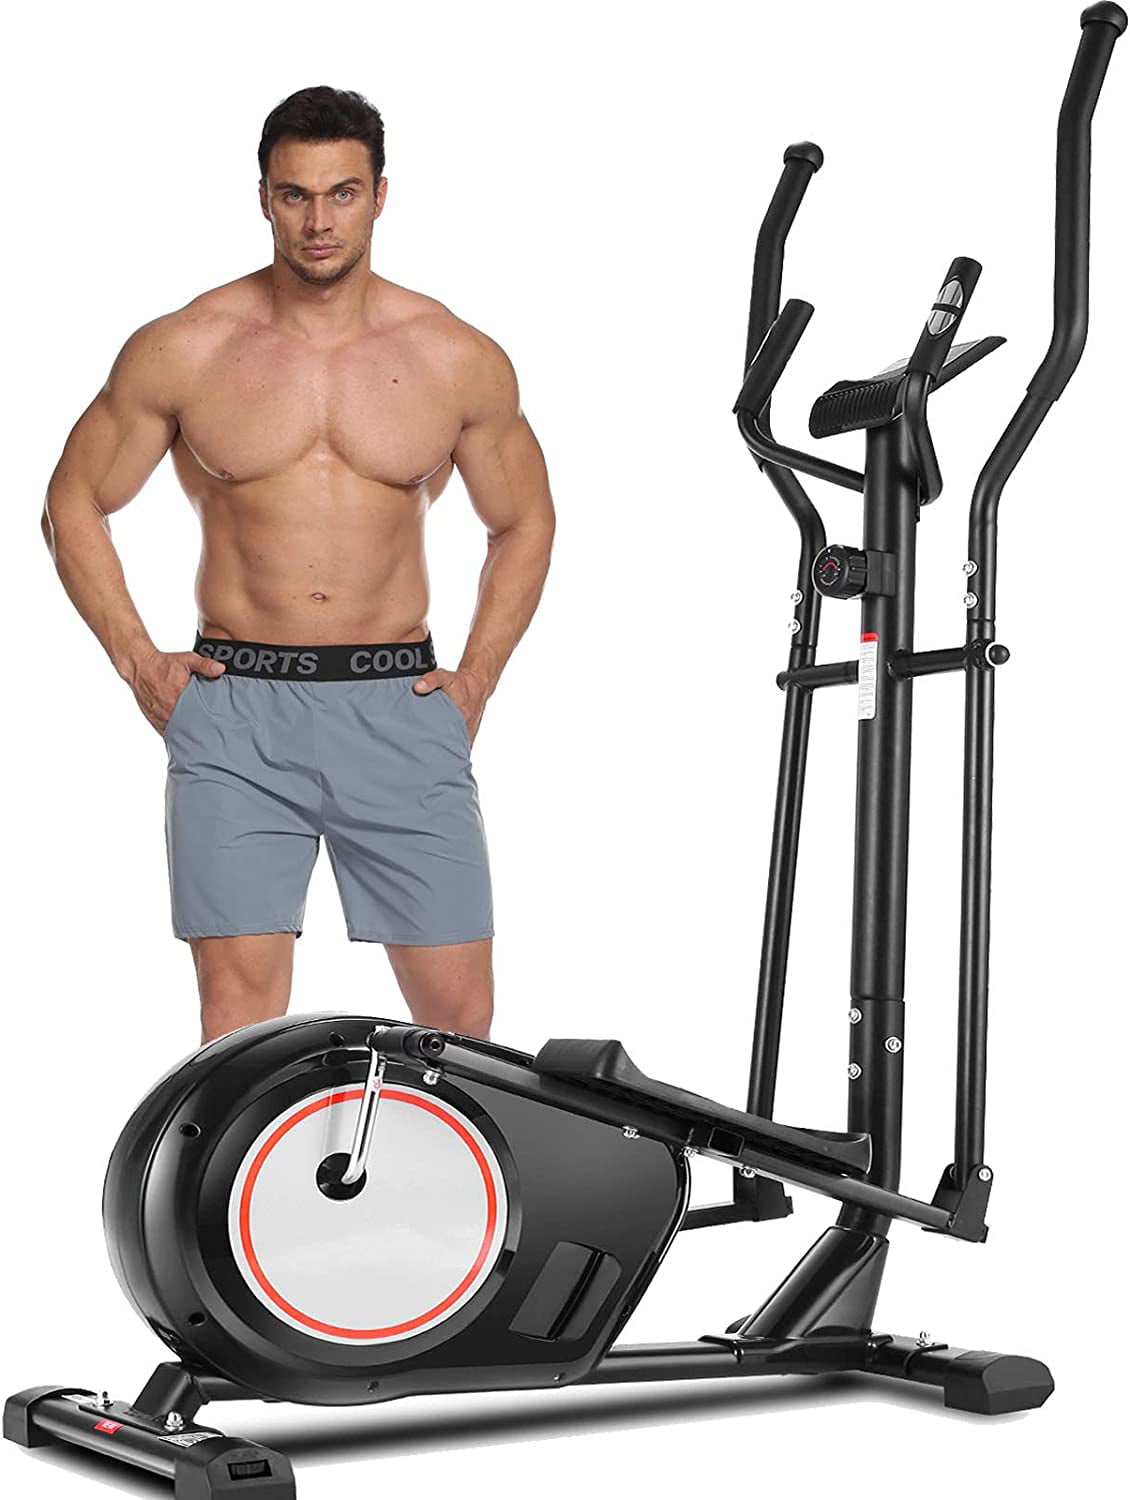 ANCHEER Elliptical Machine Cross Trainer for Home Use with LCD Monitor 